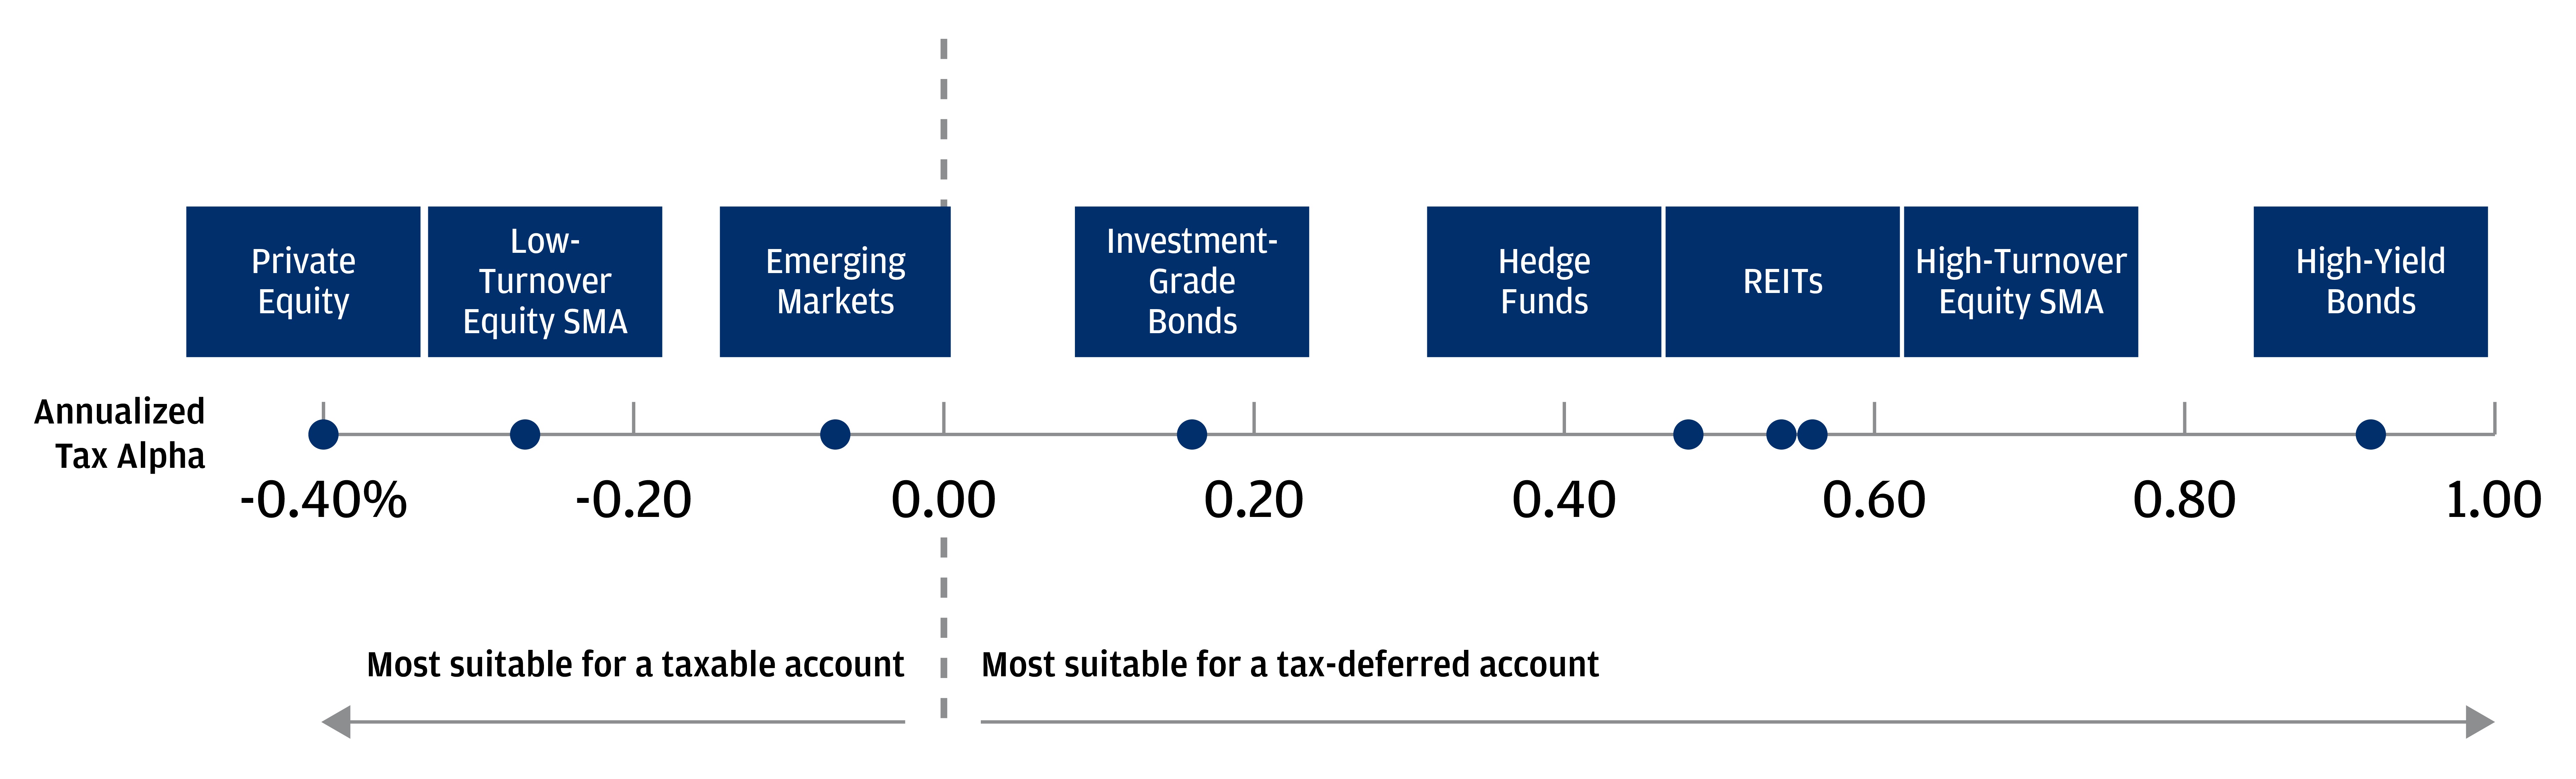 This chart shows the potential annual “tax alpha” that could be generated by placing different asset classes in a tax-deferred account instead of a taxable account.